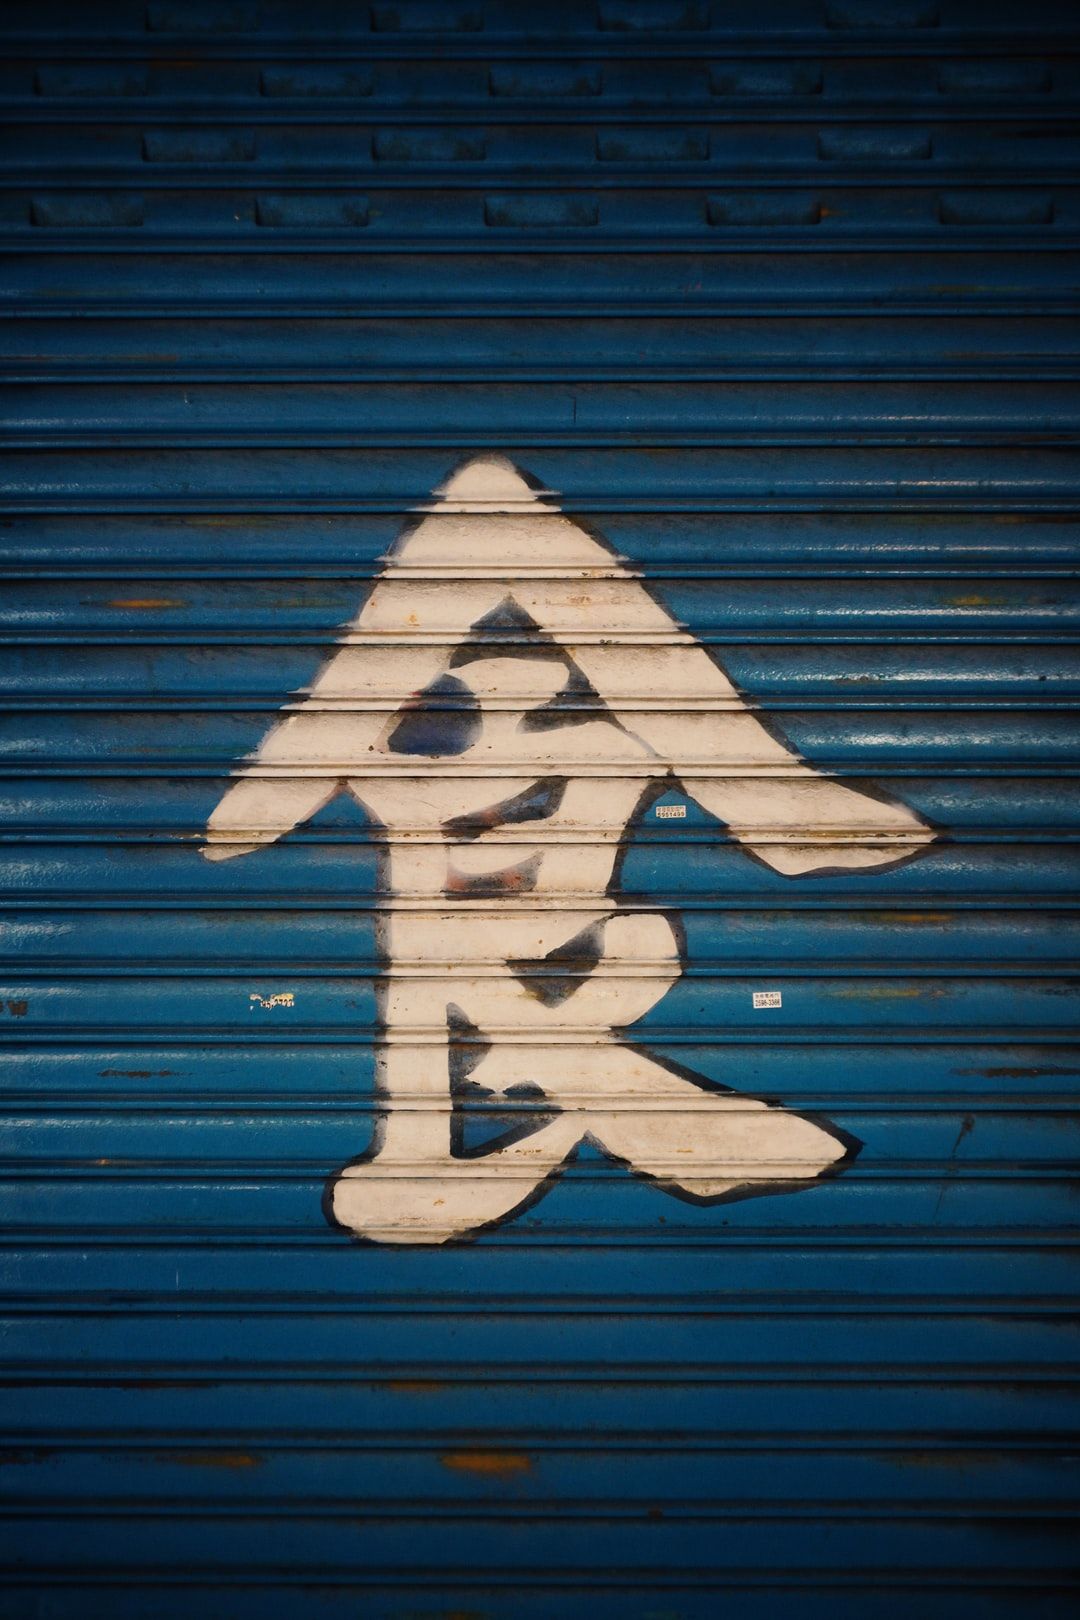 Chinese Letter Picture. Download Free .com